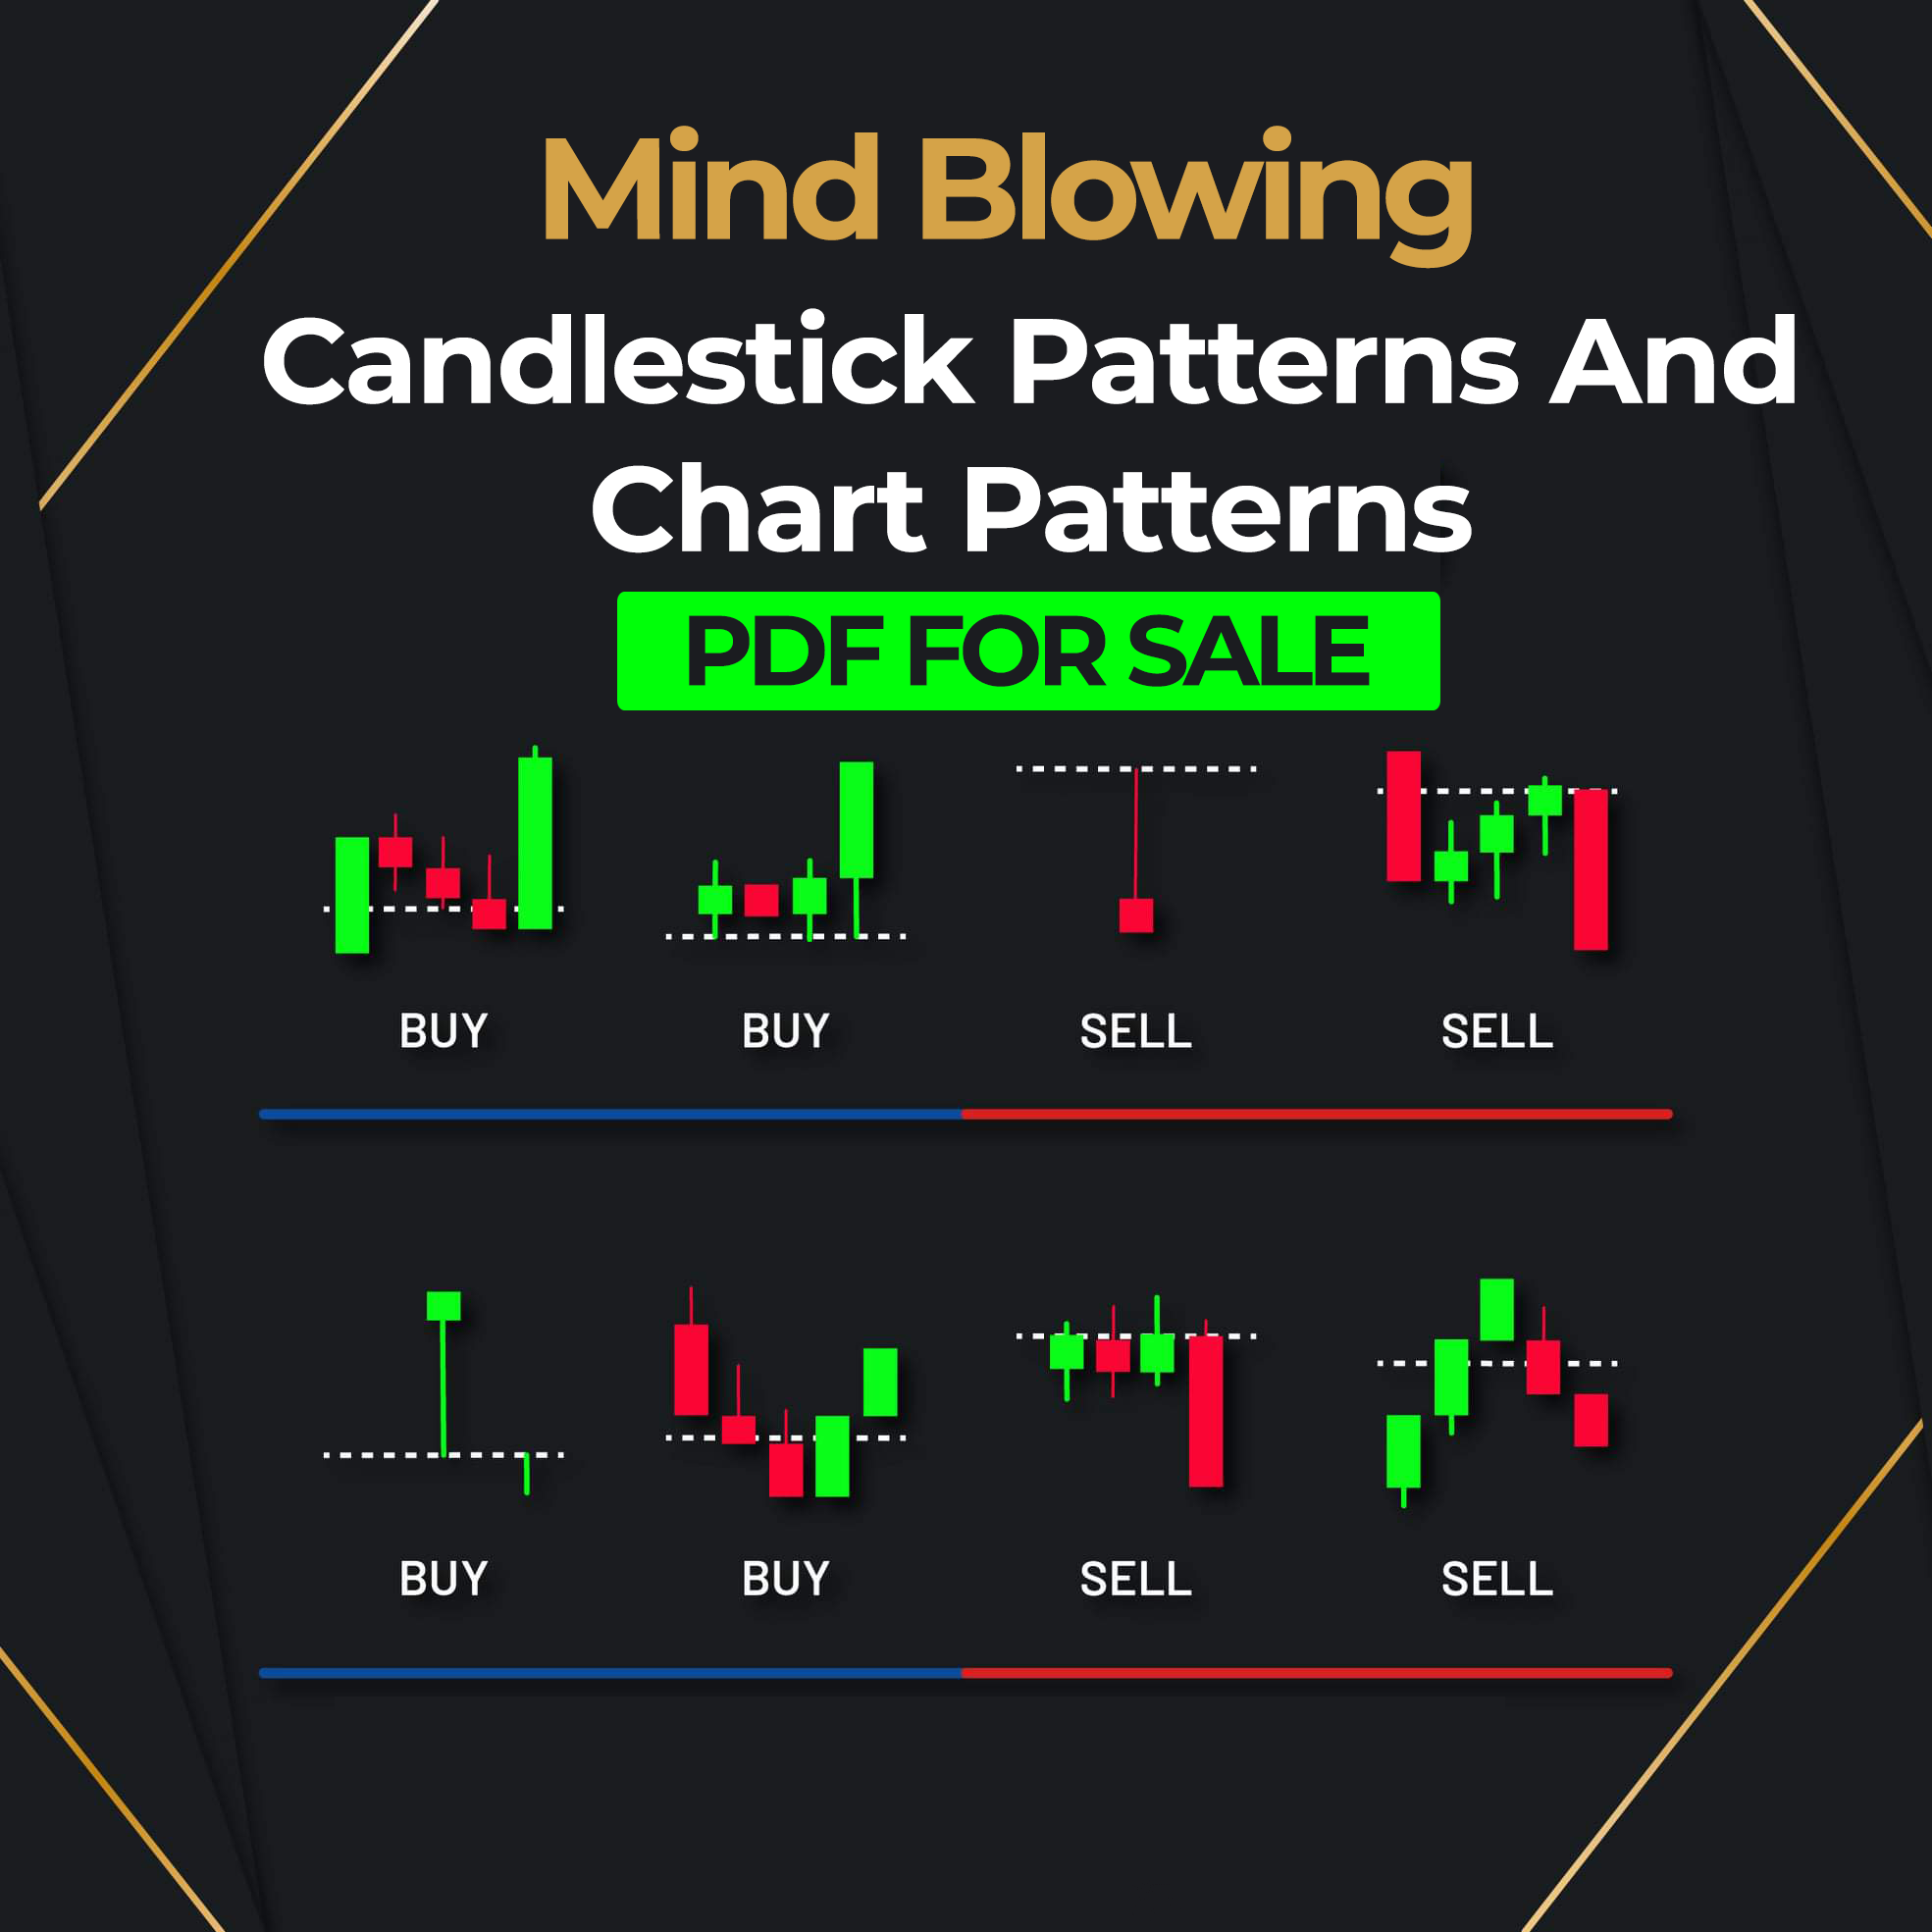 Candlestick Patterns And Chart Patterns Pdf Available